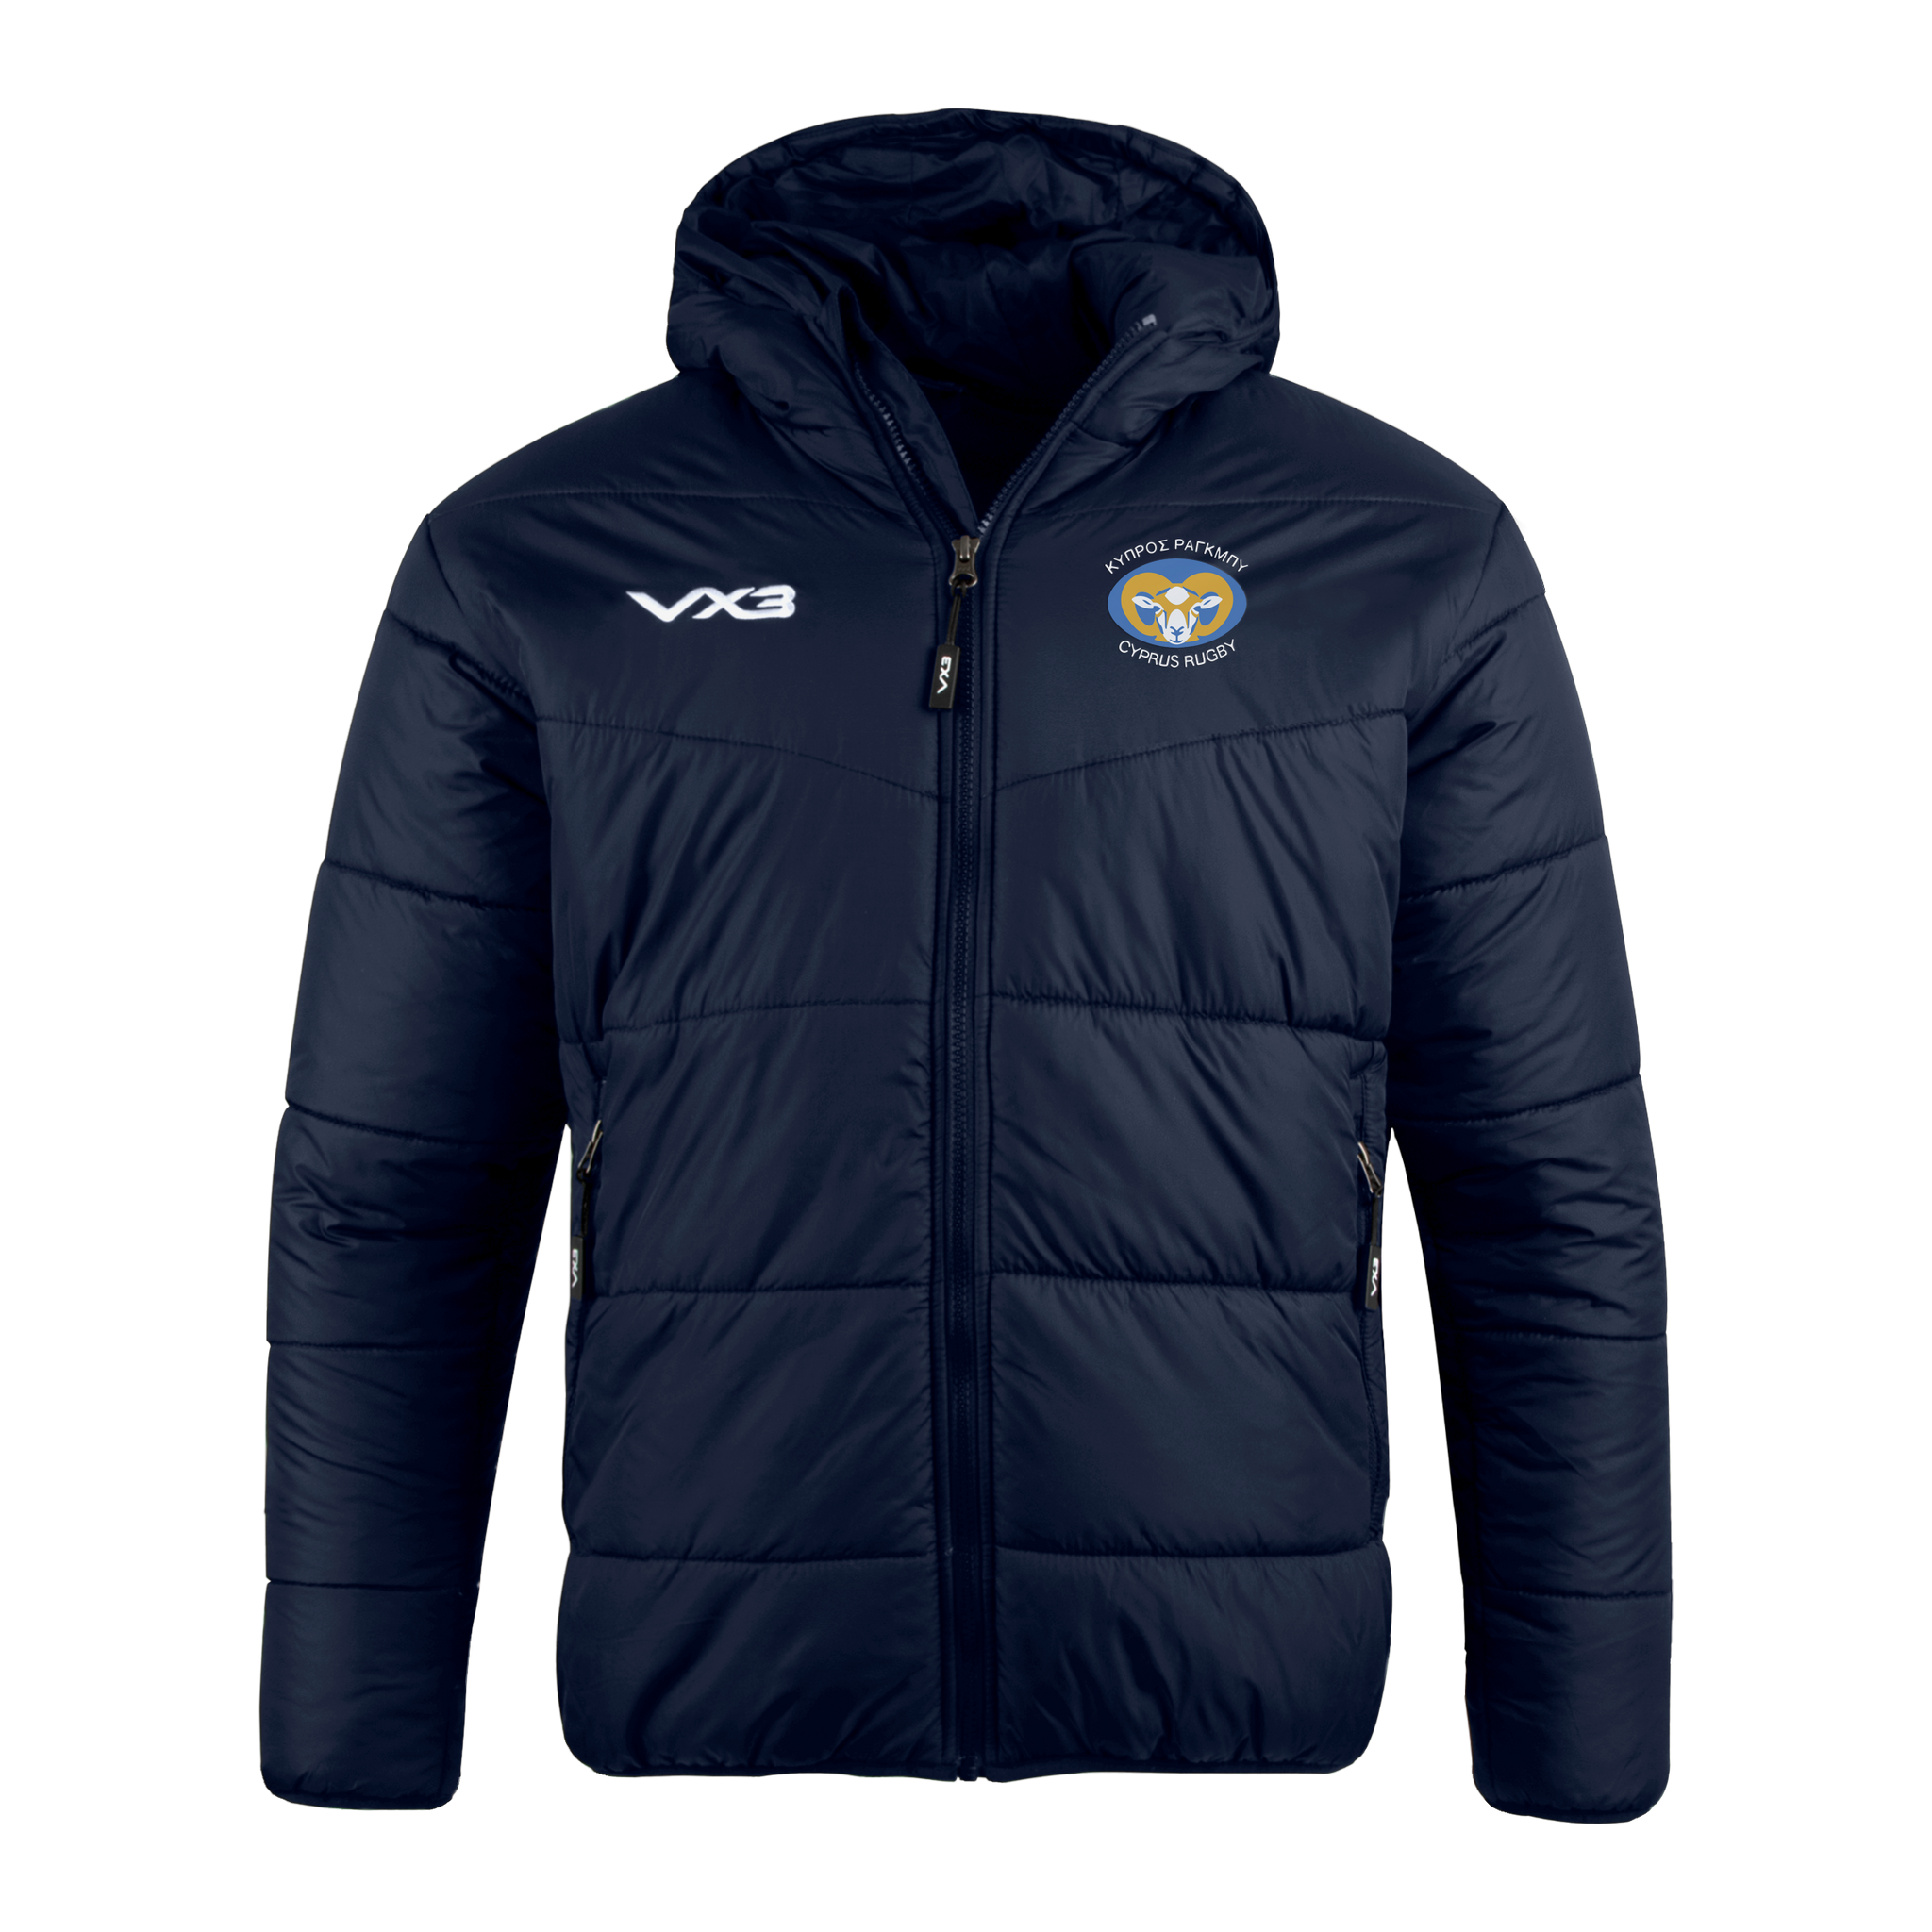 Cyprus Rugby Federation Supporters Lorica Quilted Jacket